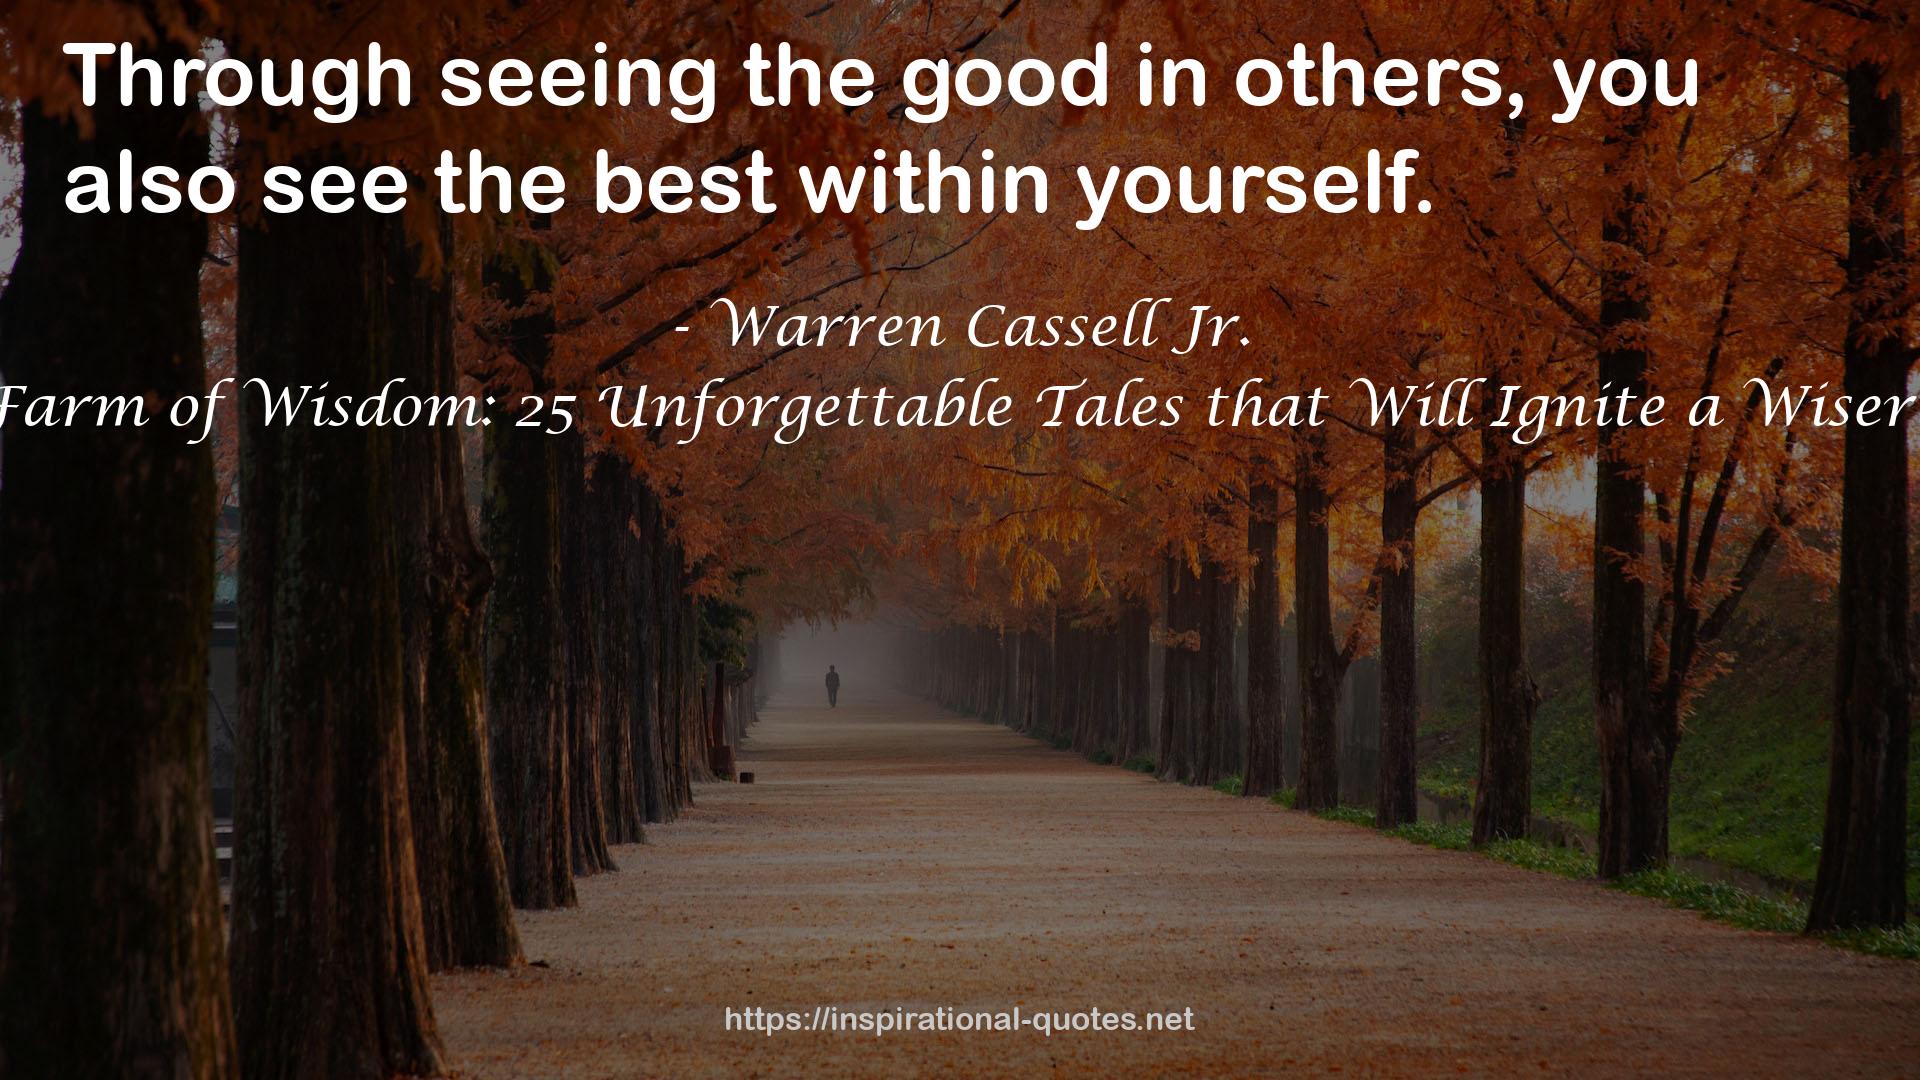 The Farm of Wisdom: 25 Unforgettable Tales that Will Ignite a Wiser You! QUOTES